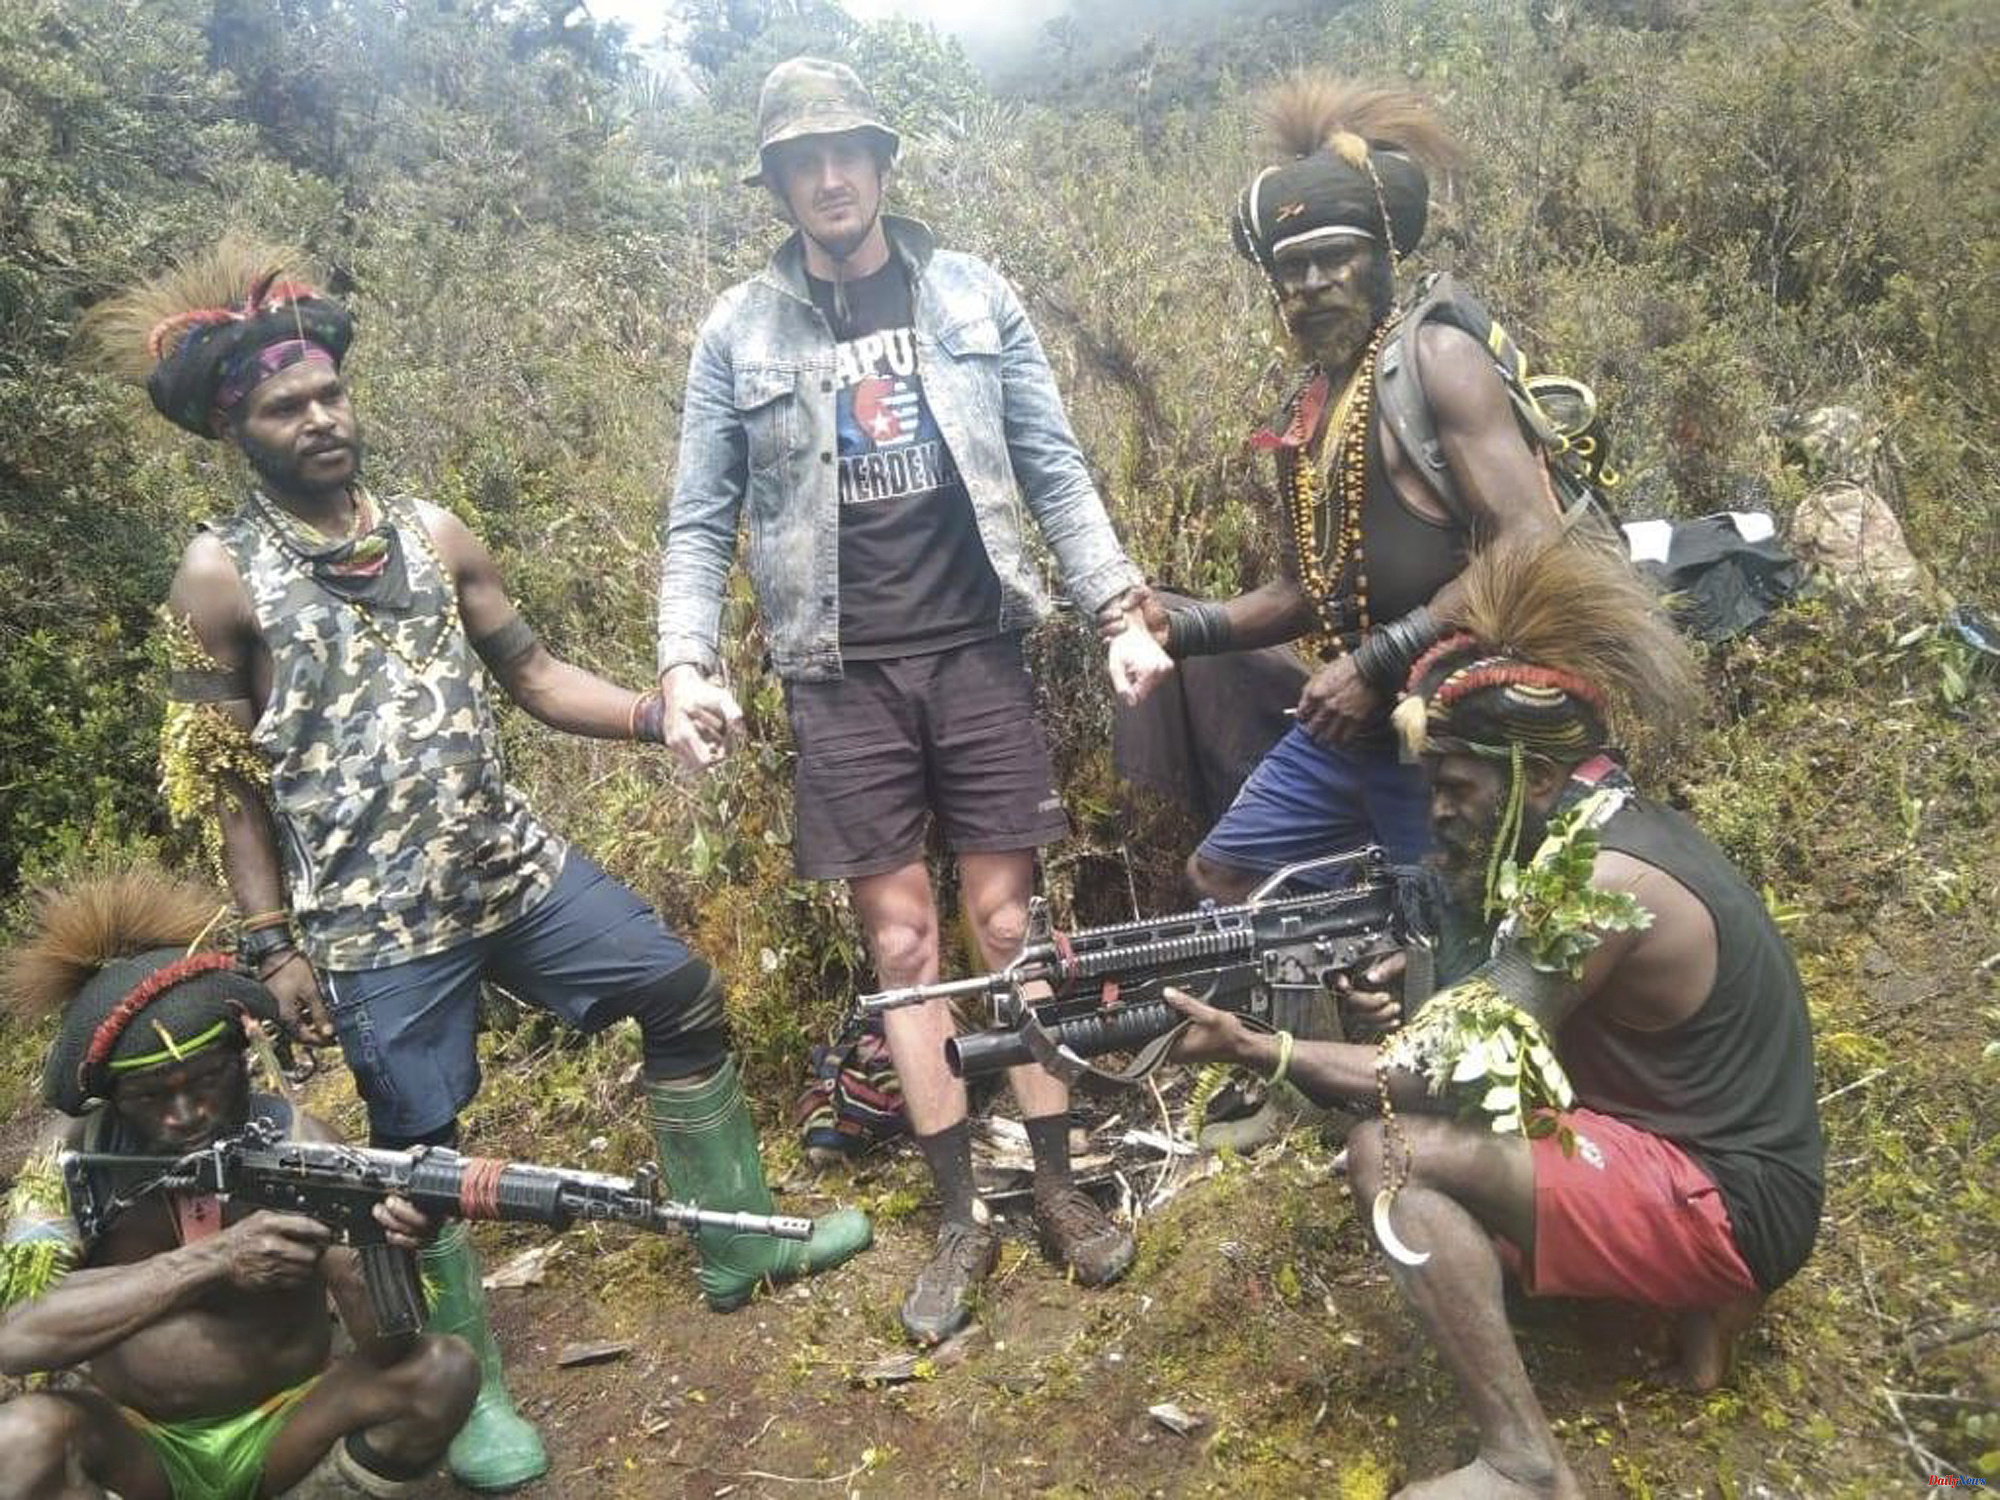 Oceania Papuan separatists armed with bows and arrows kidnap a New Zealand pilot